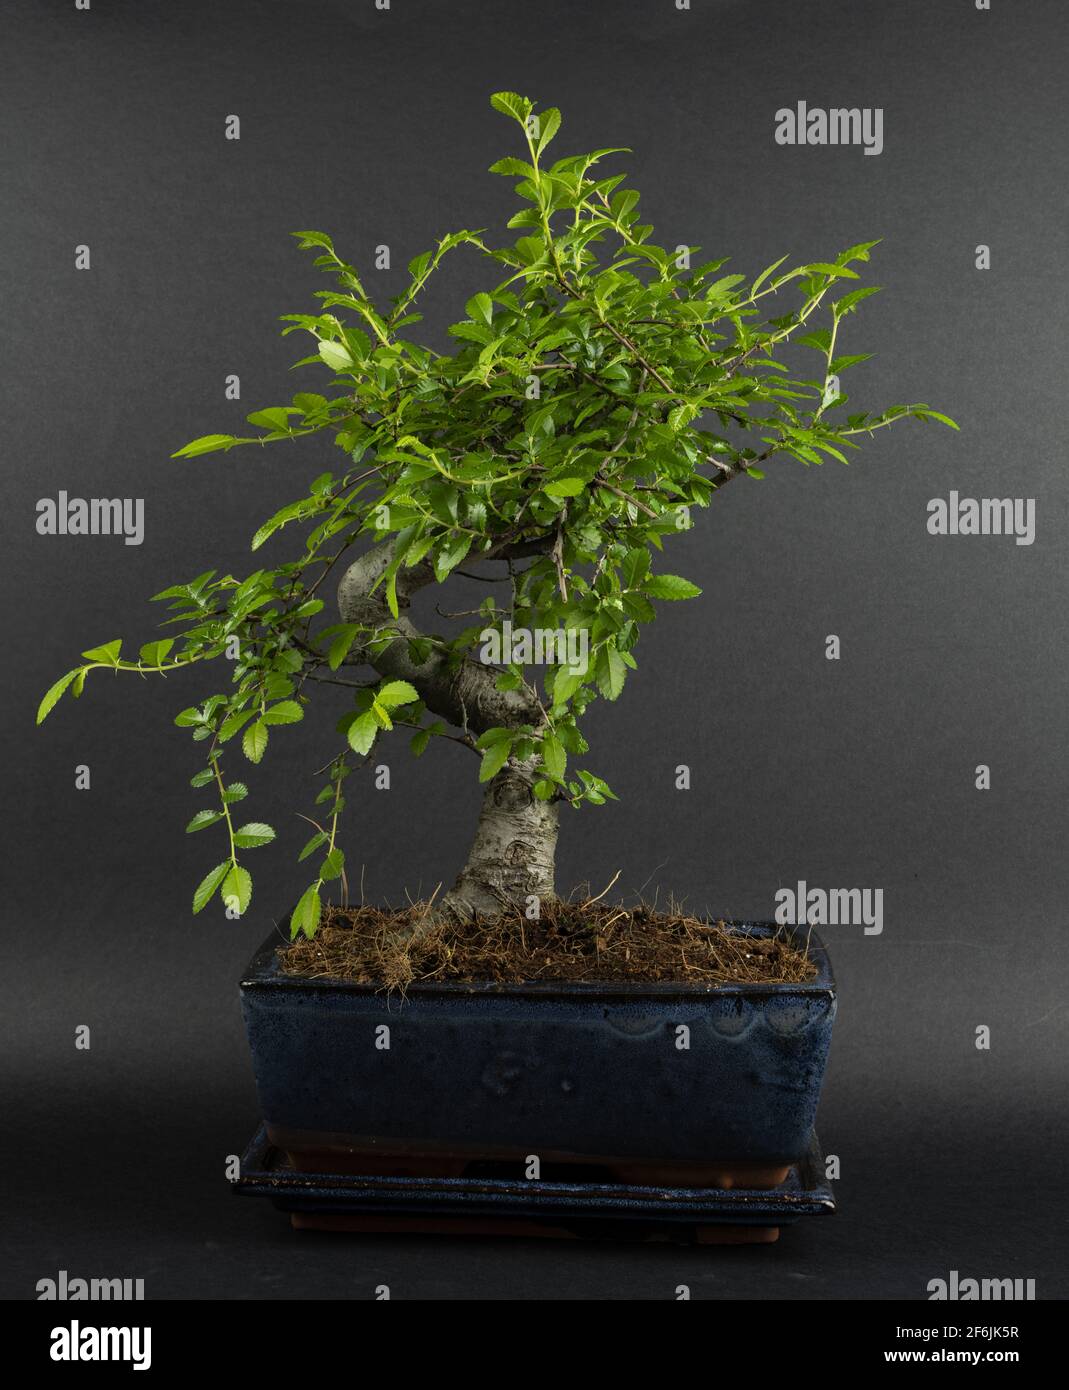 Zelkova bonsai in pot with black background, top view Stock Photo